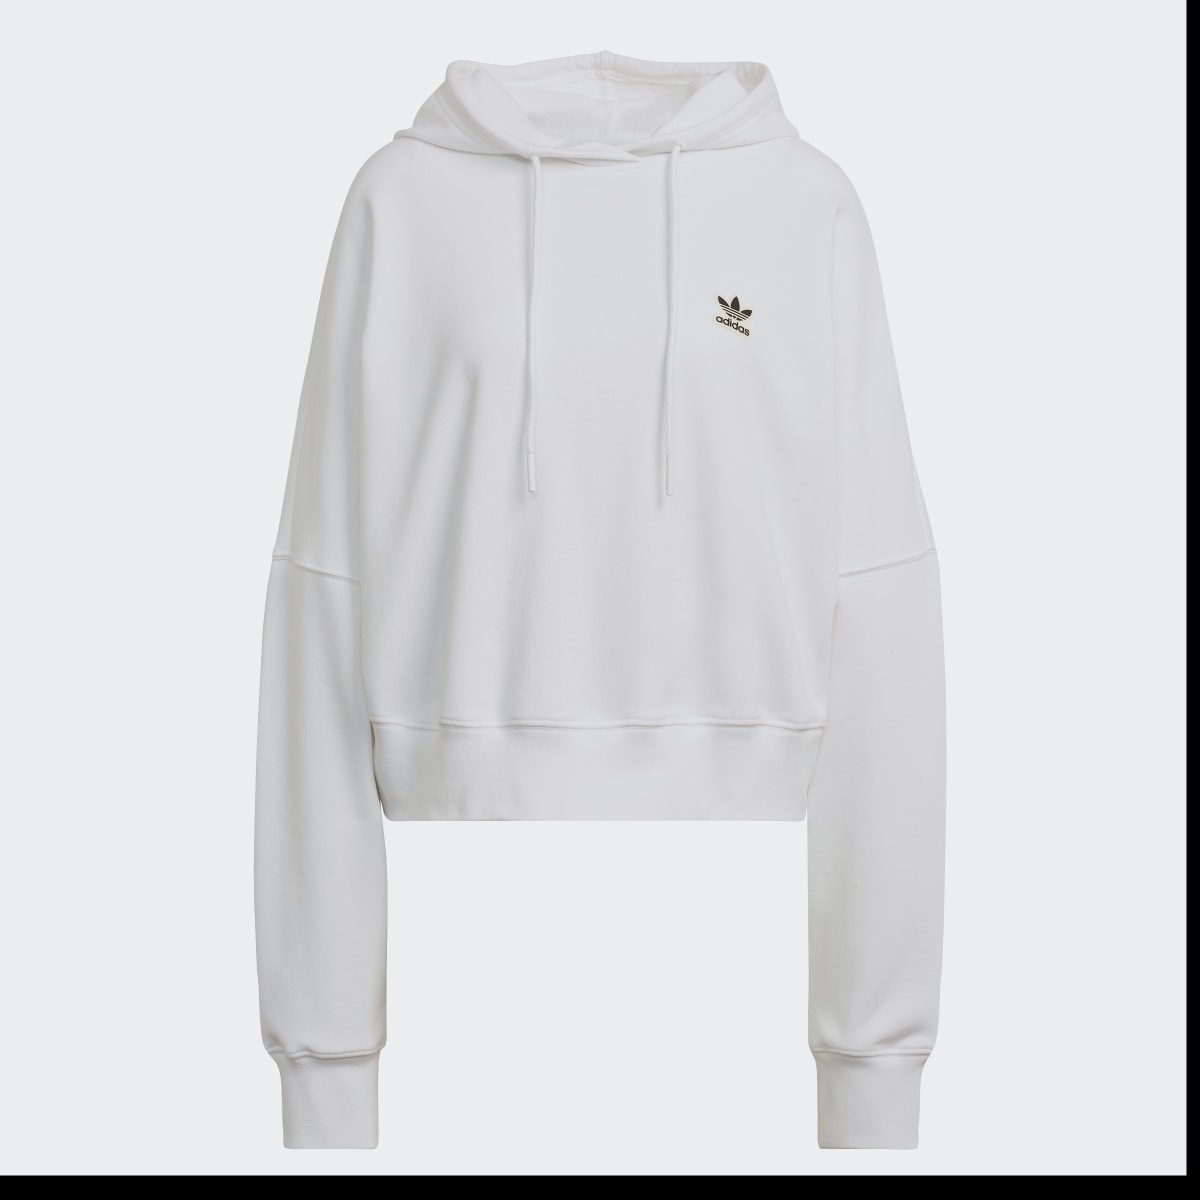 Adidas Cropped Hoodie (Plus Size). 5